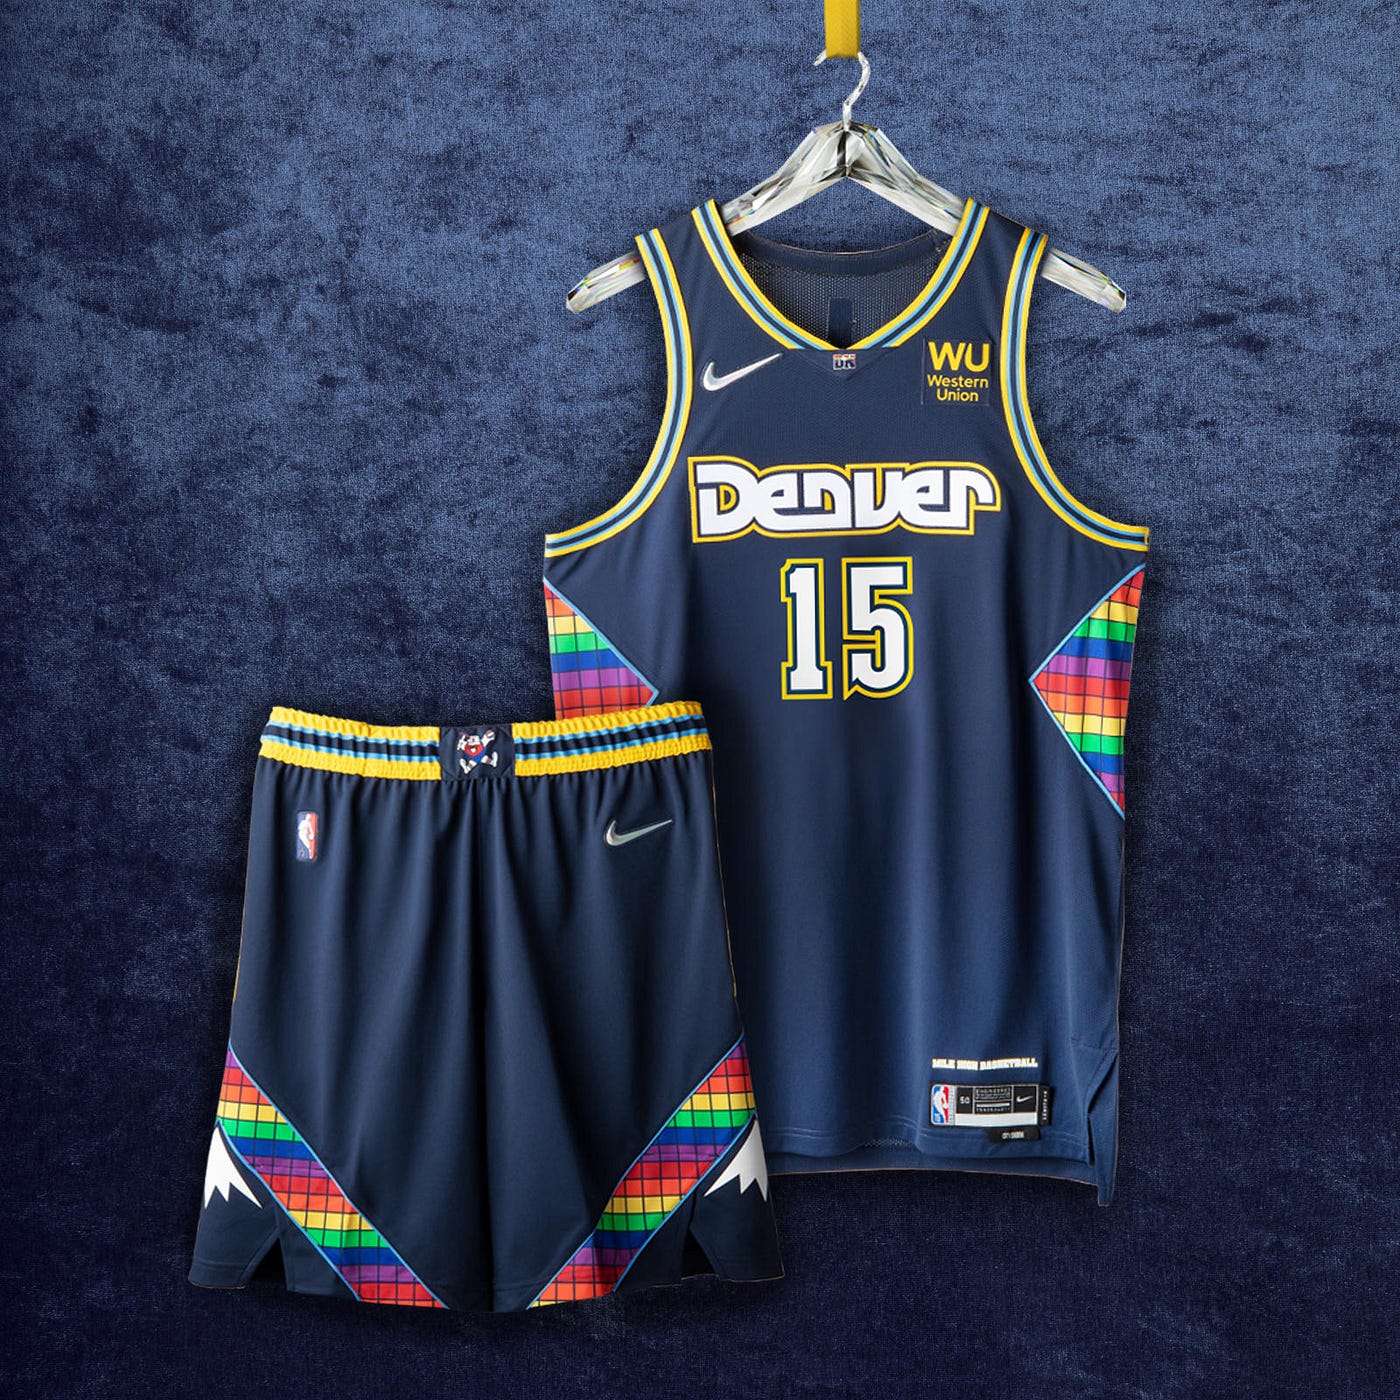 NBA City Edition jerseys 2021-22 ranked best to worst